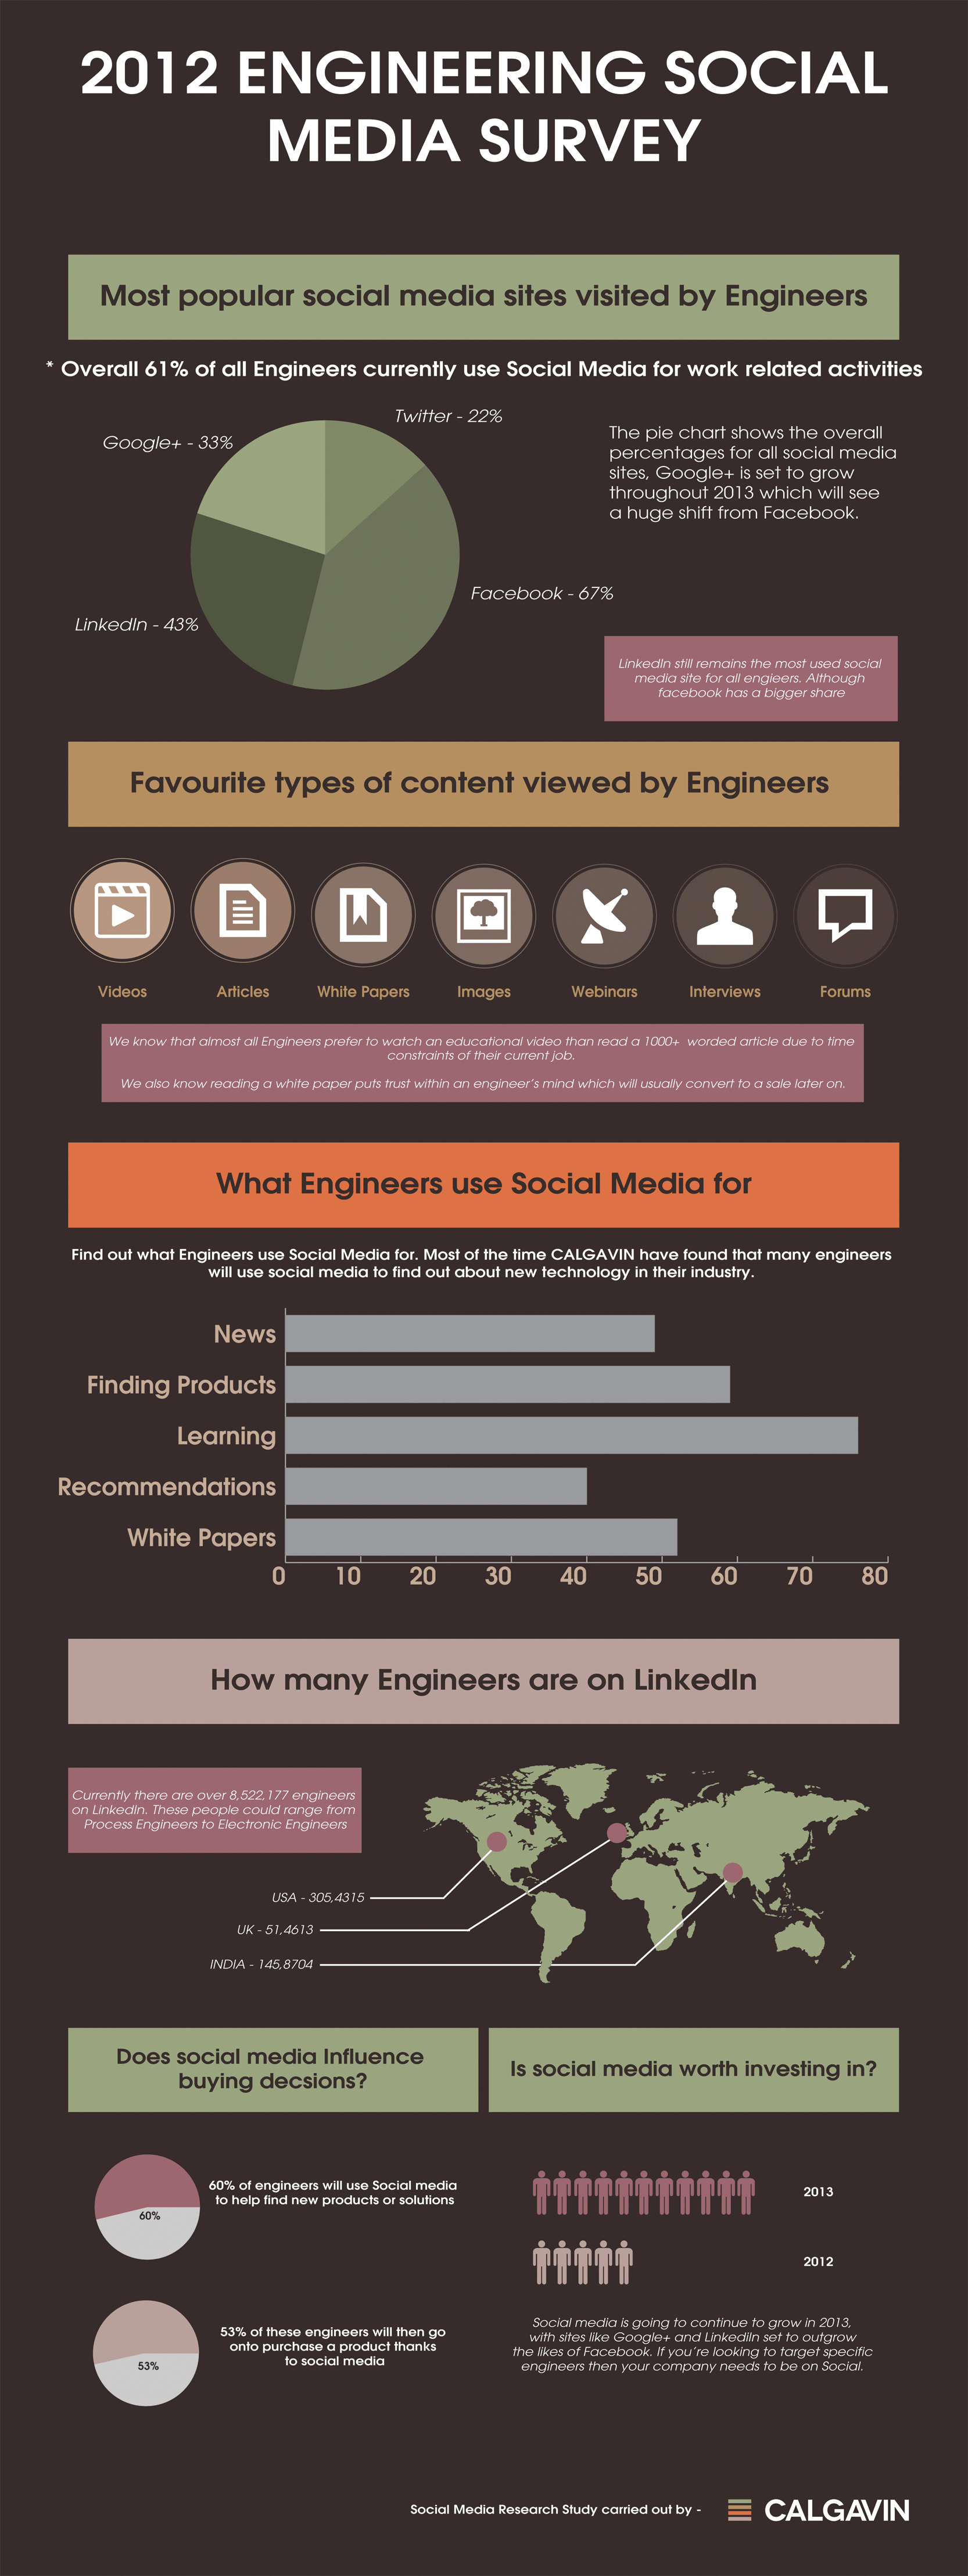 Social Media for Engineers